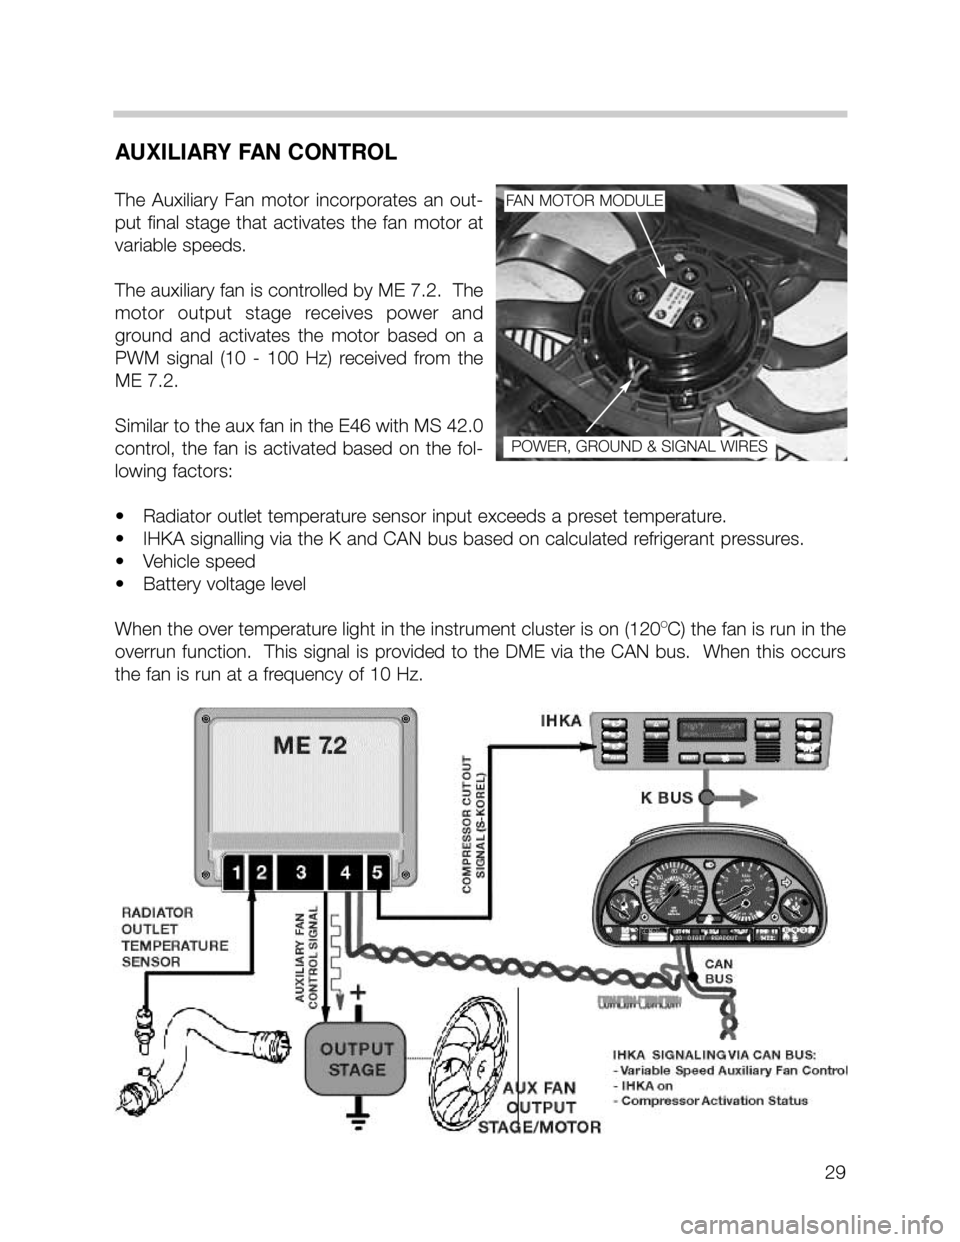 BMW X5 2006 E53 M62TU Engine Owners Manual 29
AUXILIARY FAN CONTROL
The  Auxiliary  Fan  motor  incorporates  an  out-
put  final  stage  that  activates  the  fan  motor  at
variable speeds.  
The auxiliary fan is controlled by ME 7.2.  The
m